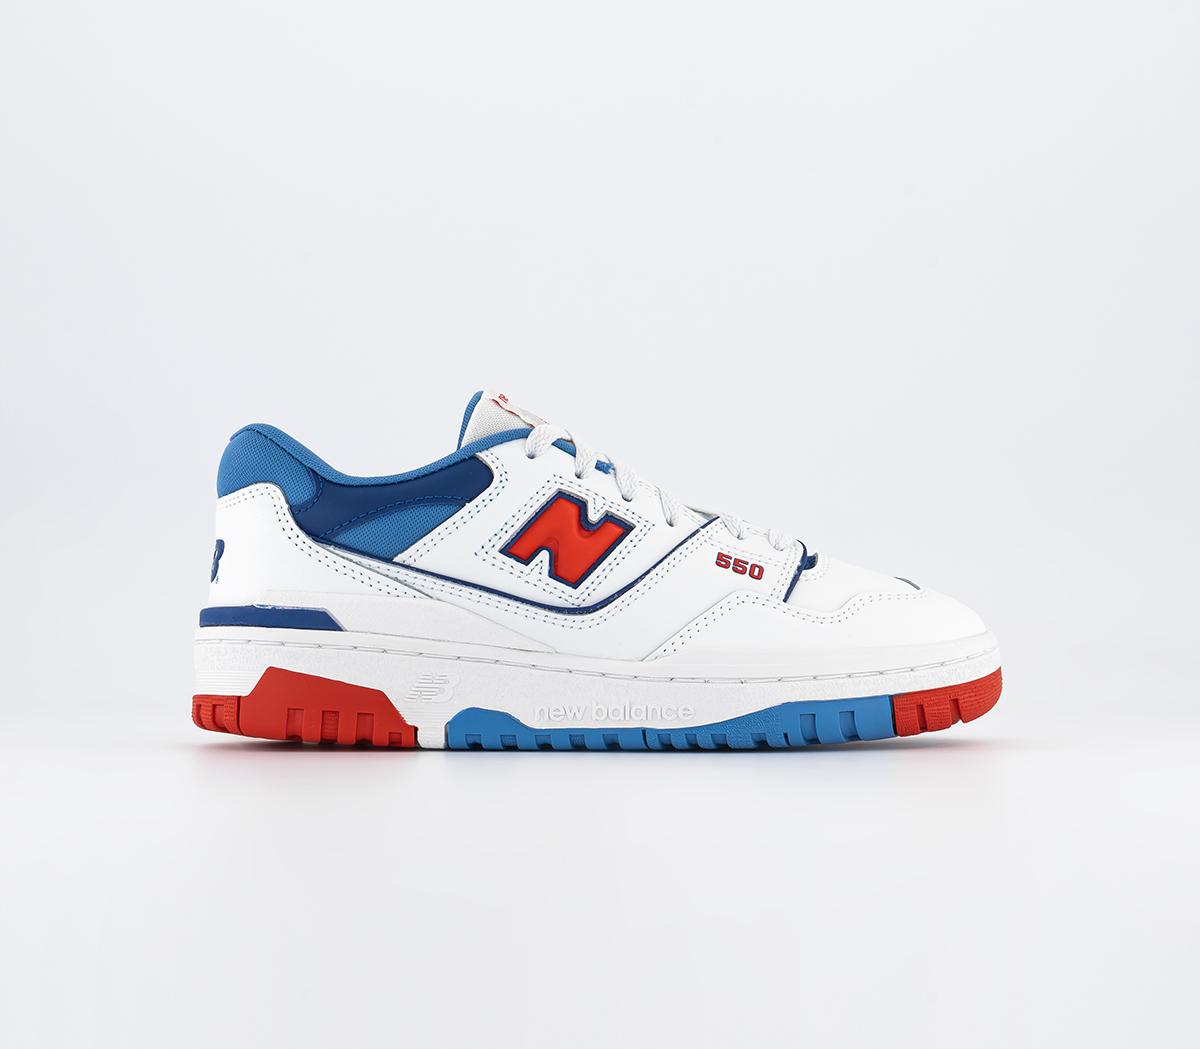 New Balance BB550 Junior Trainers White Blue Navy Red - Unisex Sports